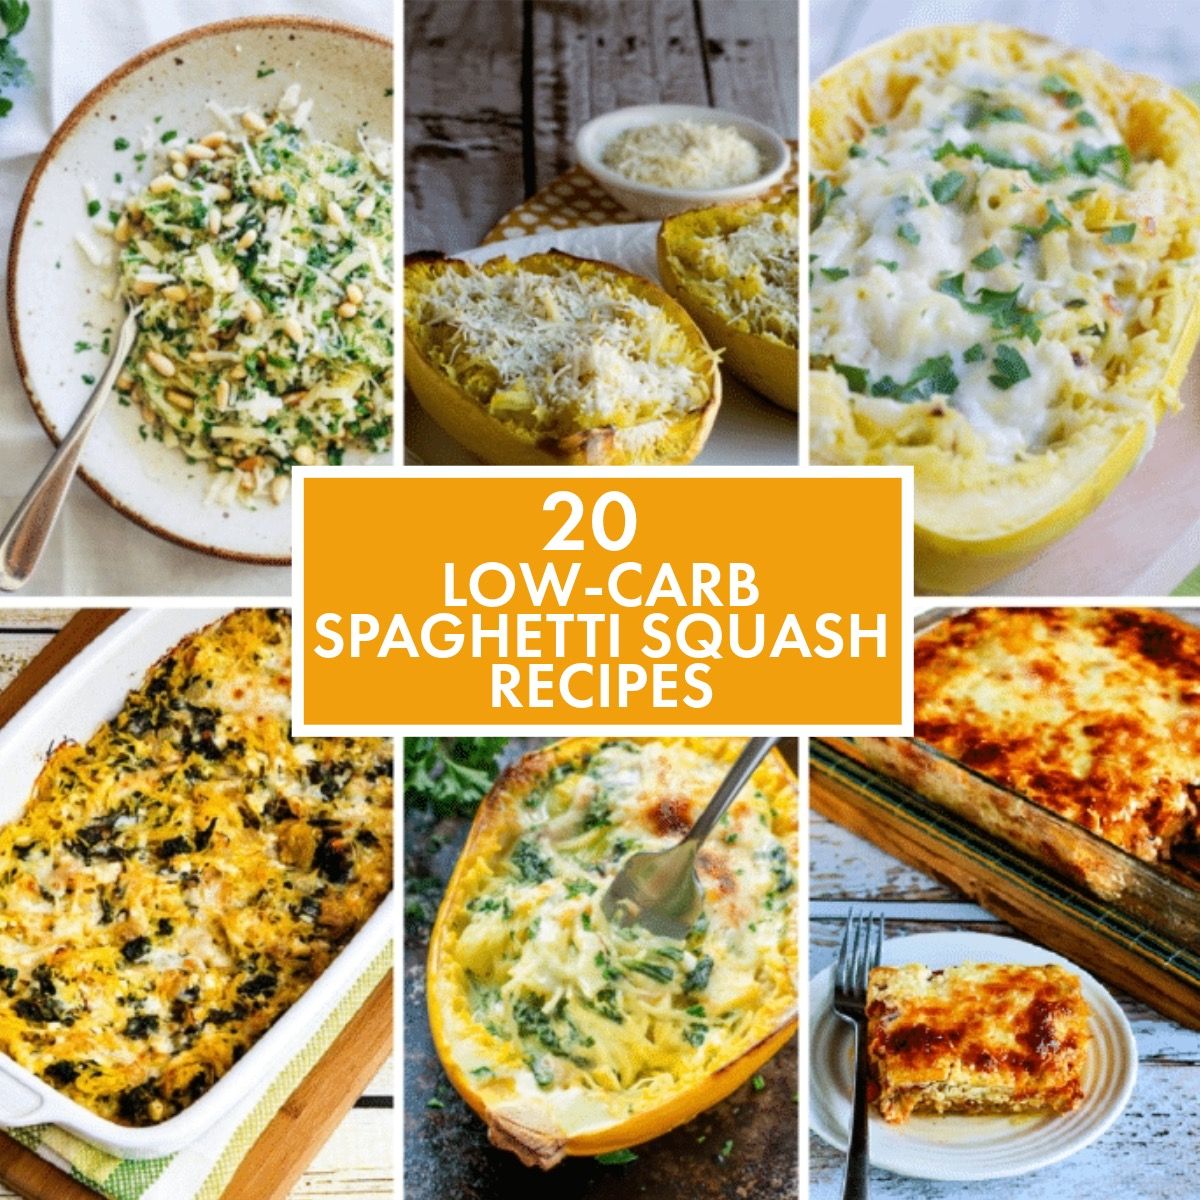  Low-Carb Spaghetti Squash Recipes collage photo of featured recipes.